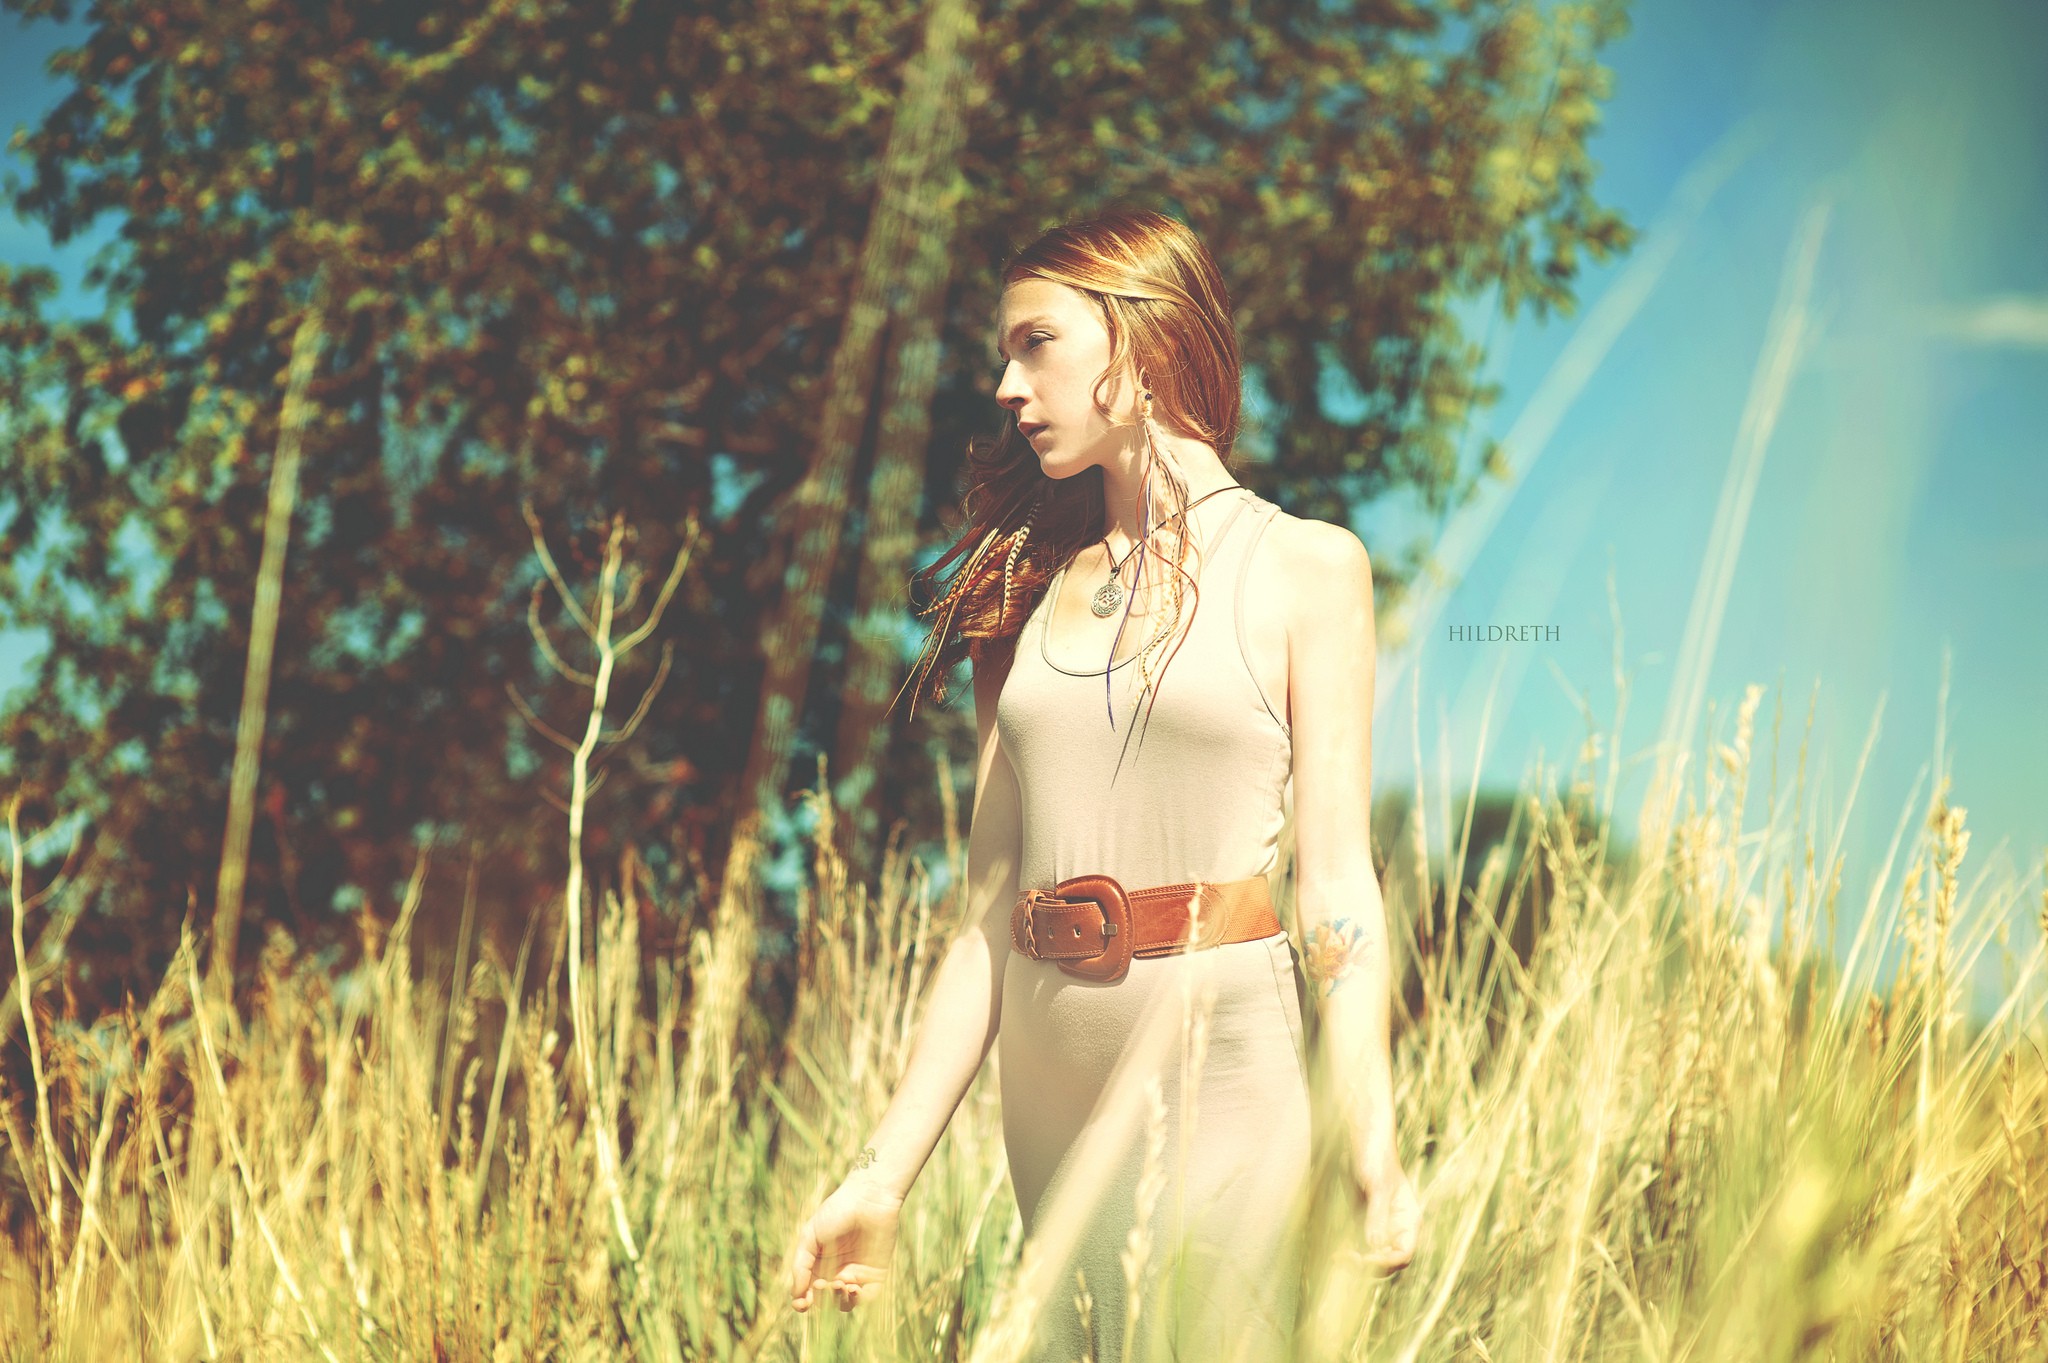 People 2048x1363 women outdoors field women model redhead plants nature standing looking into the distance Charles Hildreth Saoirse Ronan brown belt